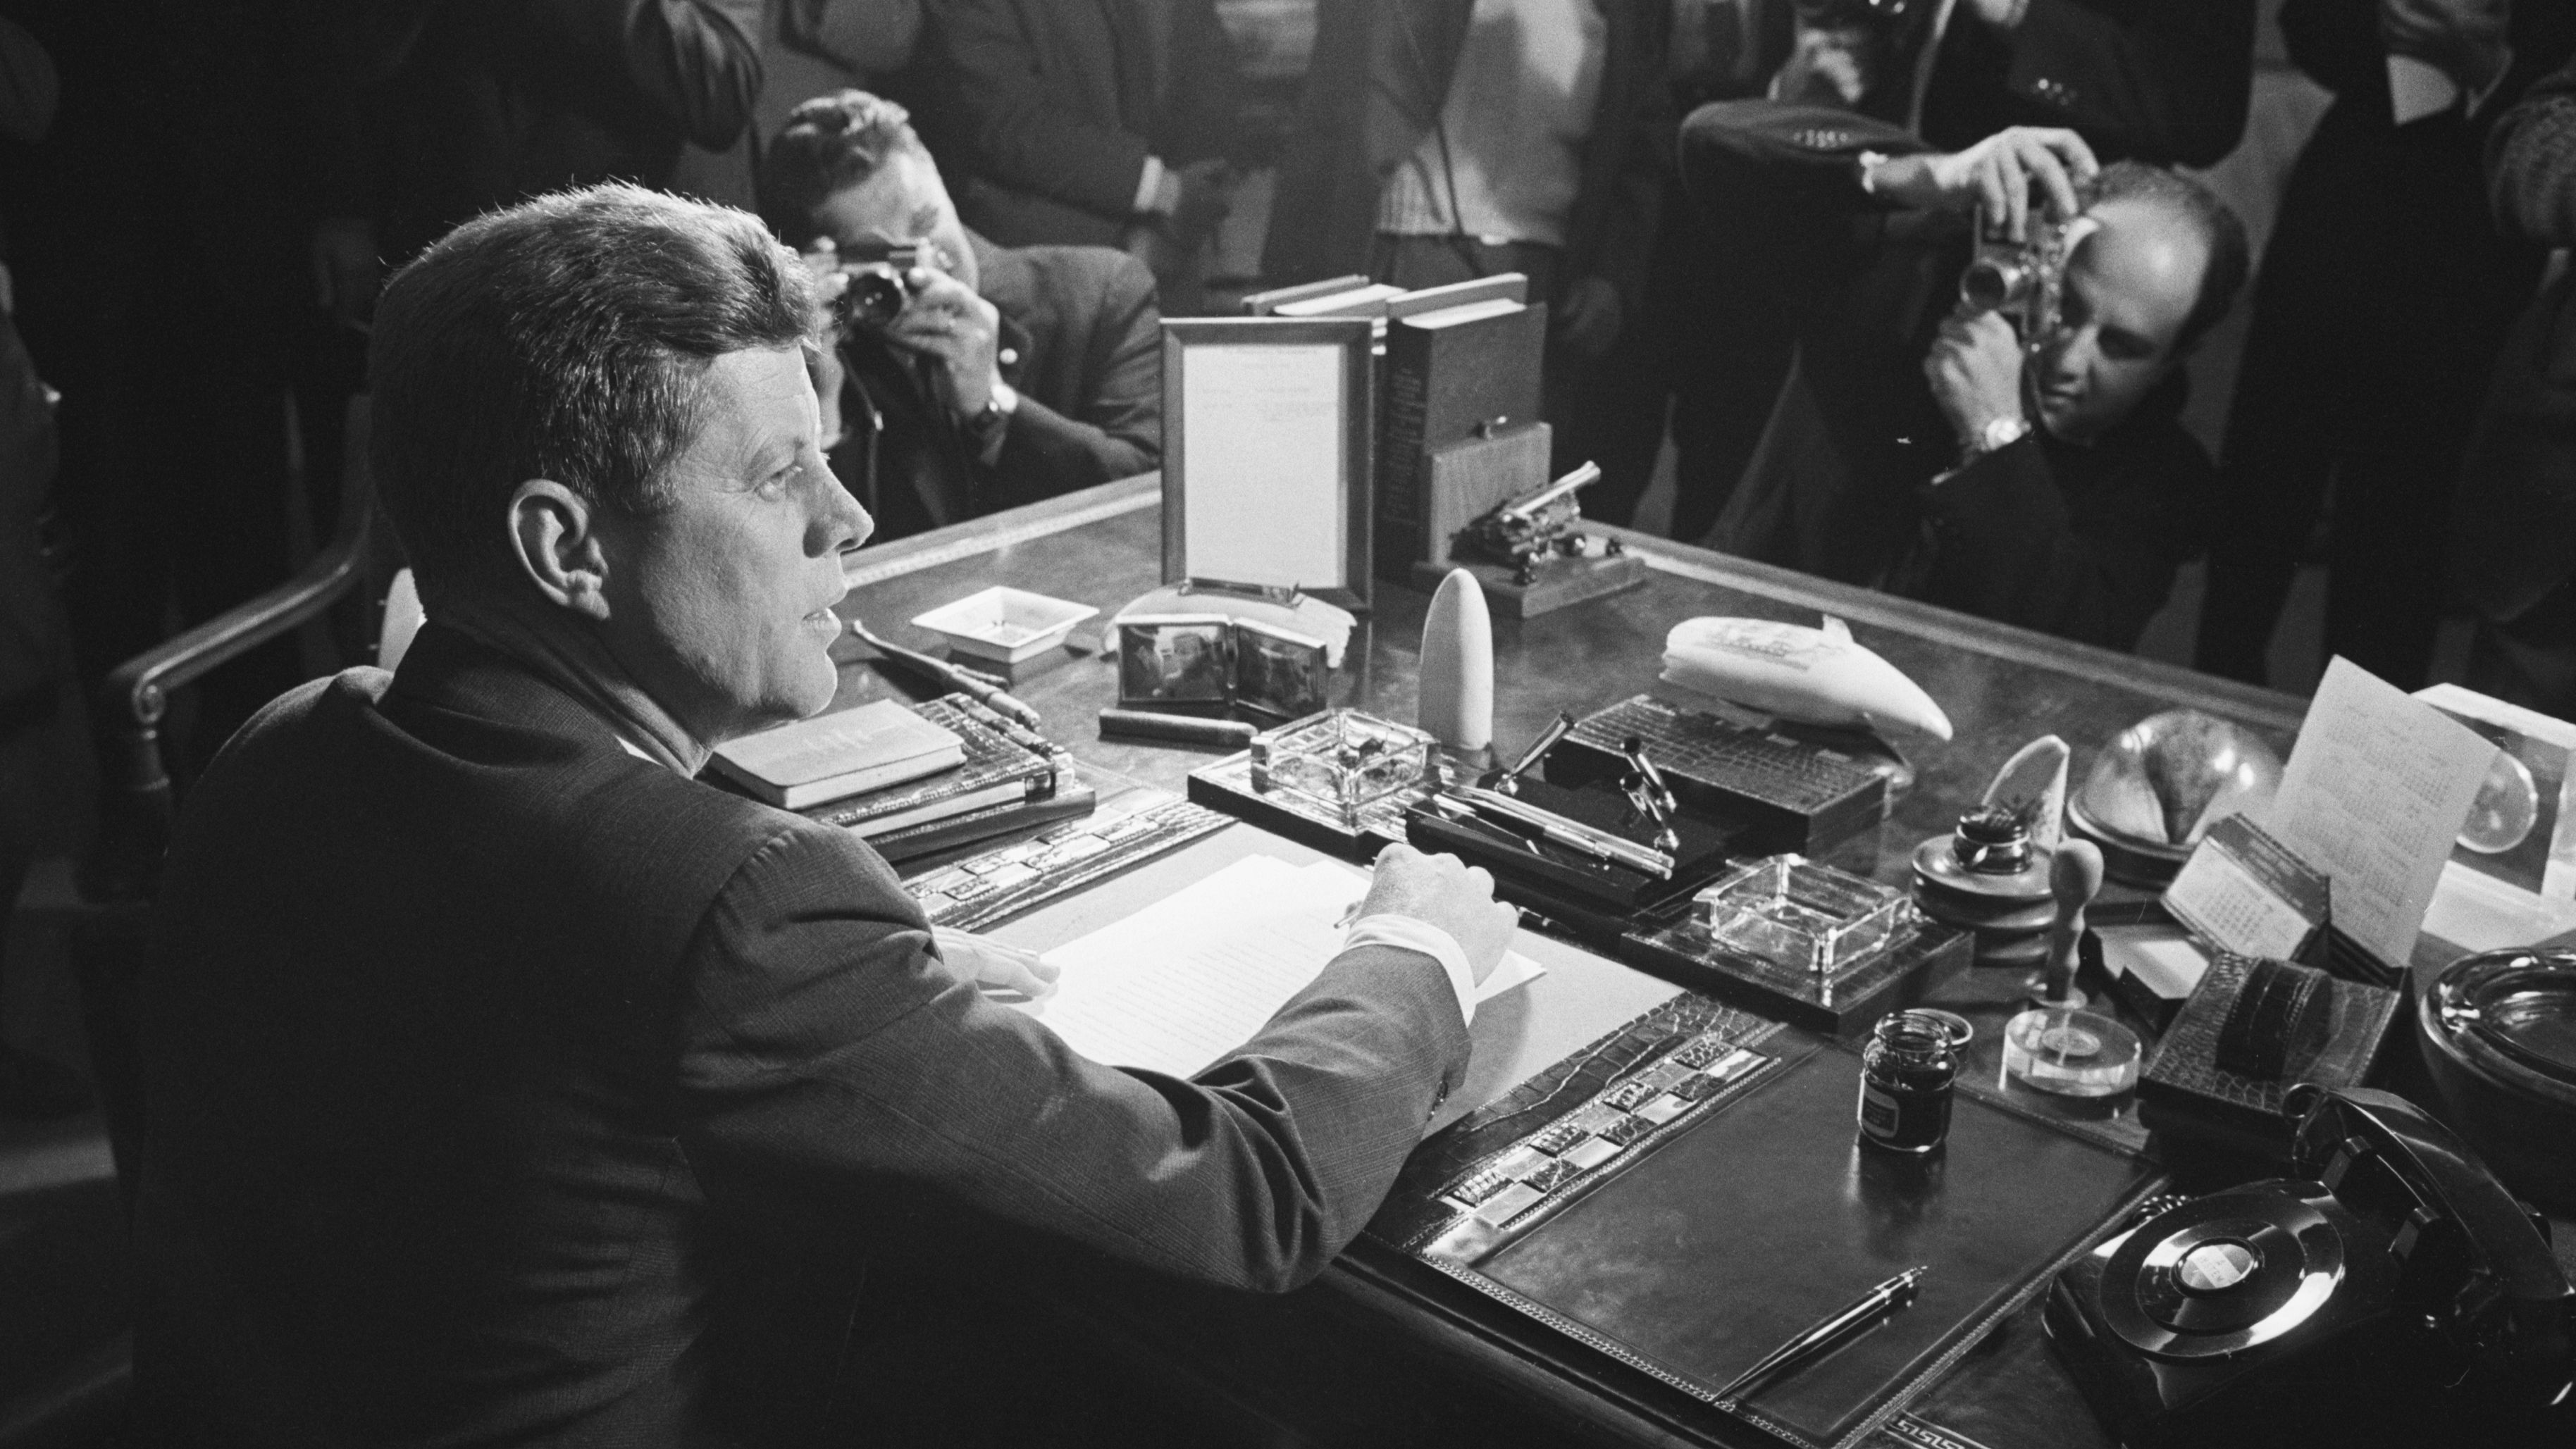 Reporters take pictures of US President John F. Kennedy behind his desk after he signed the arms embargo against Cuba in 1962. The embargo effectively quarantined Cuba. In 1961, a US-organized invasion of 1,400 Cuban exiles was defeated by Castro's forces at the Bay of Pigs. President Kennedy took full responsibility for the disaster. The next year, the Soviet Union installed nuclear missiles on Cuba capable of reaching most of the US. Kennedy ordered a naval blockade of Cuba until the Soviets removed the missiles. Six days later, the Soviets agree to remove the missiles, defusing one of the most dangerous confrontations of the Cold War.